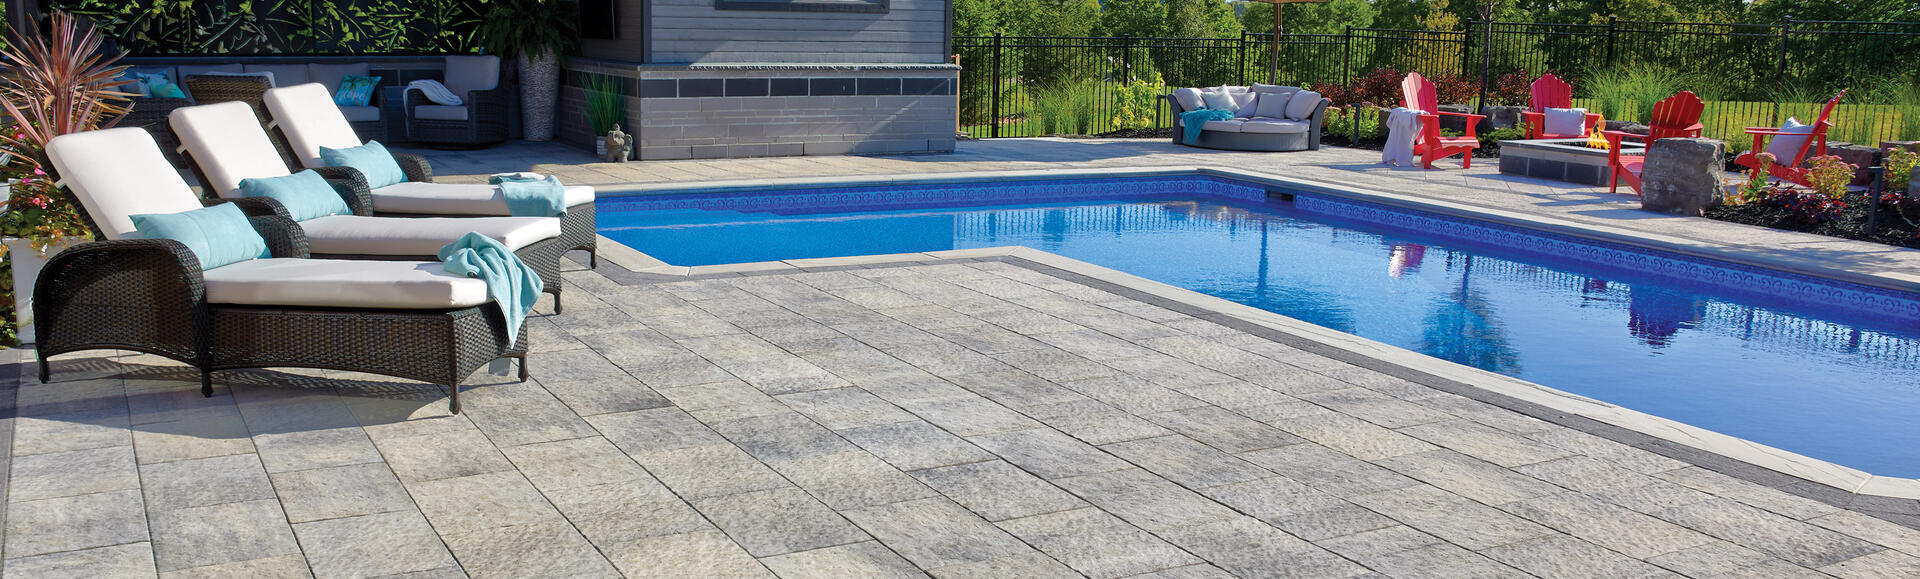 Patio with pool using Rialto and Monterey products from Brampton Brick